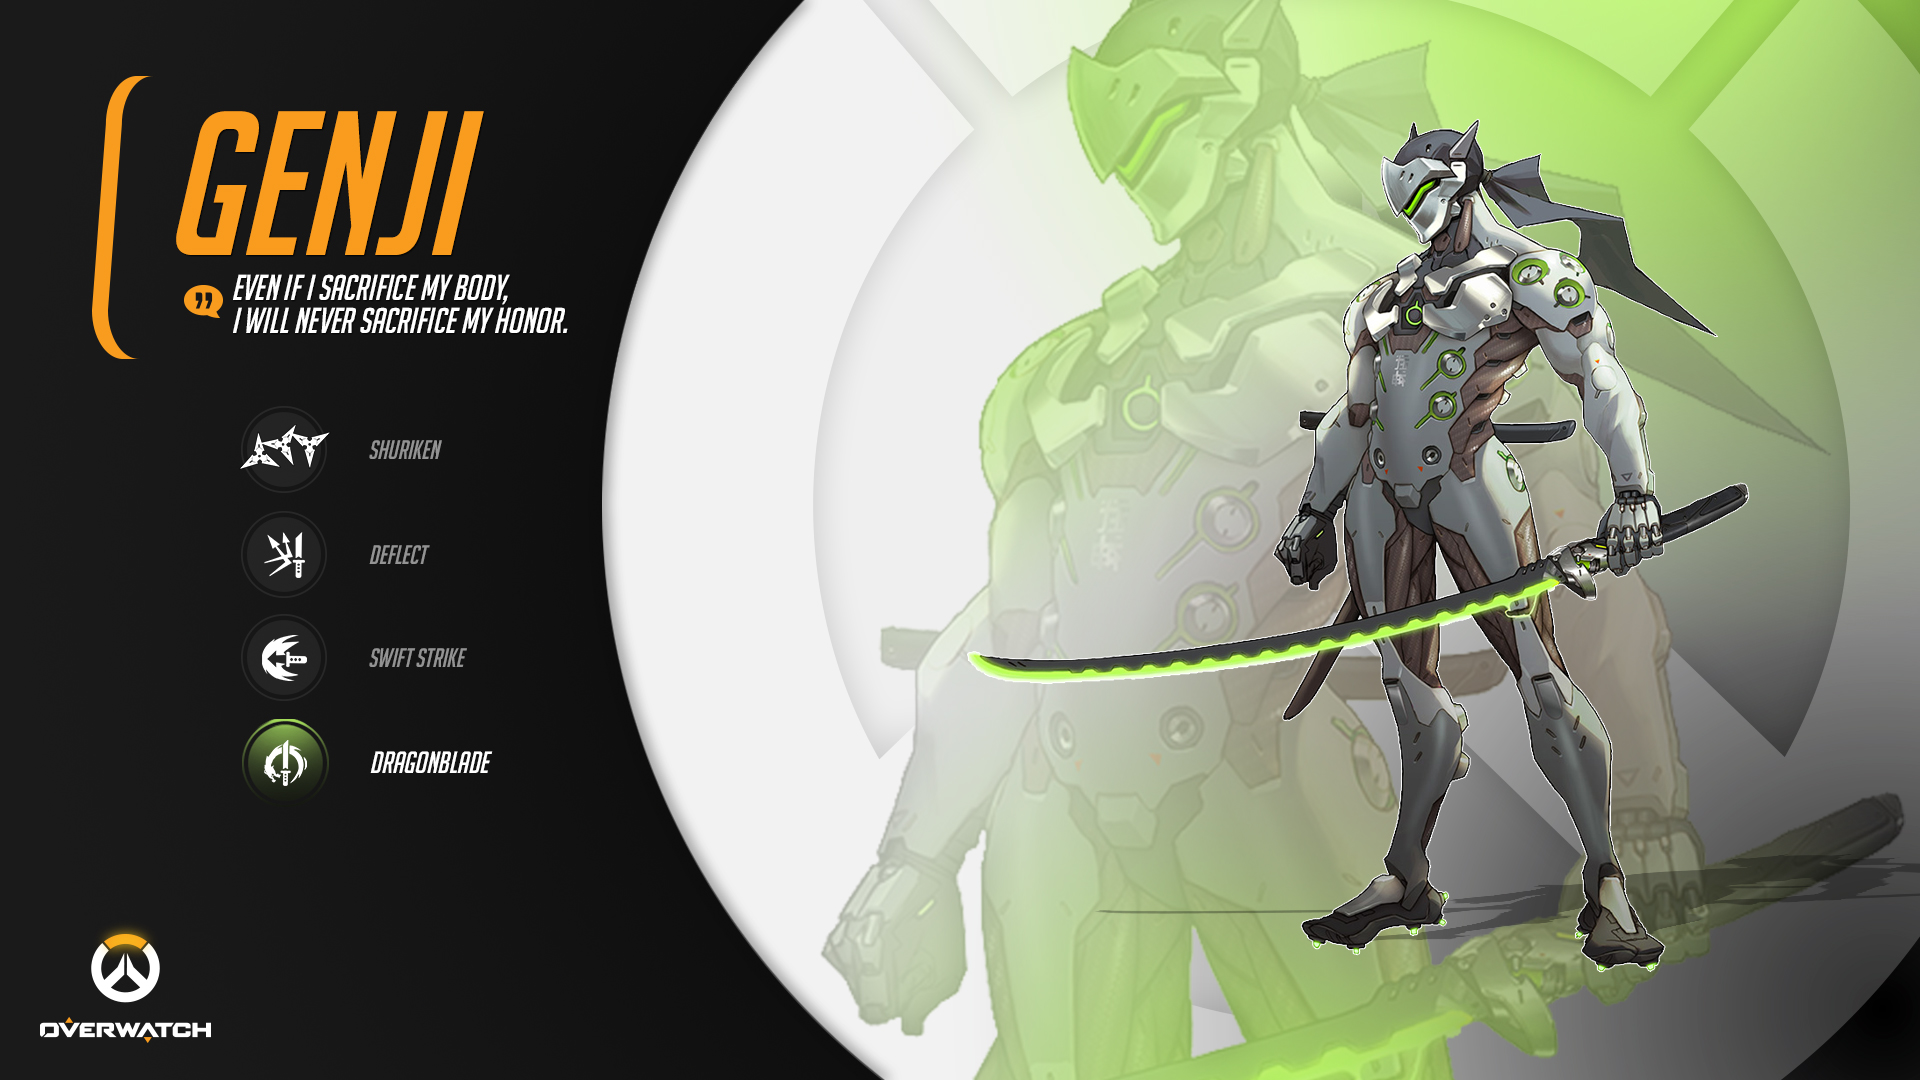 Genji Has The Potential To Kill Whole Teams And Carry His Team Almost